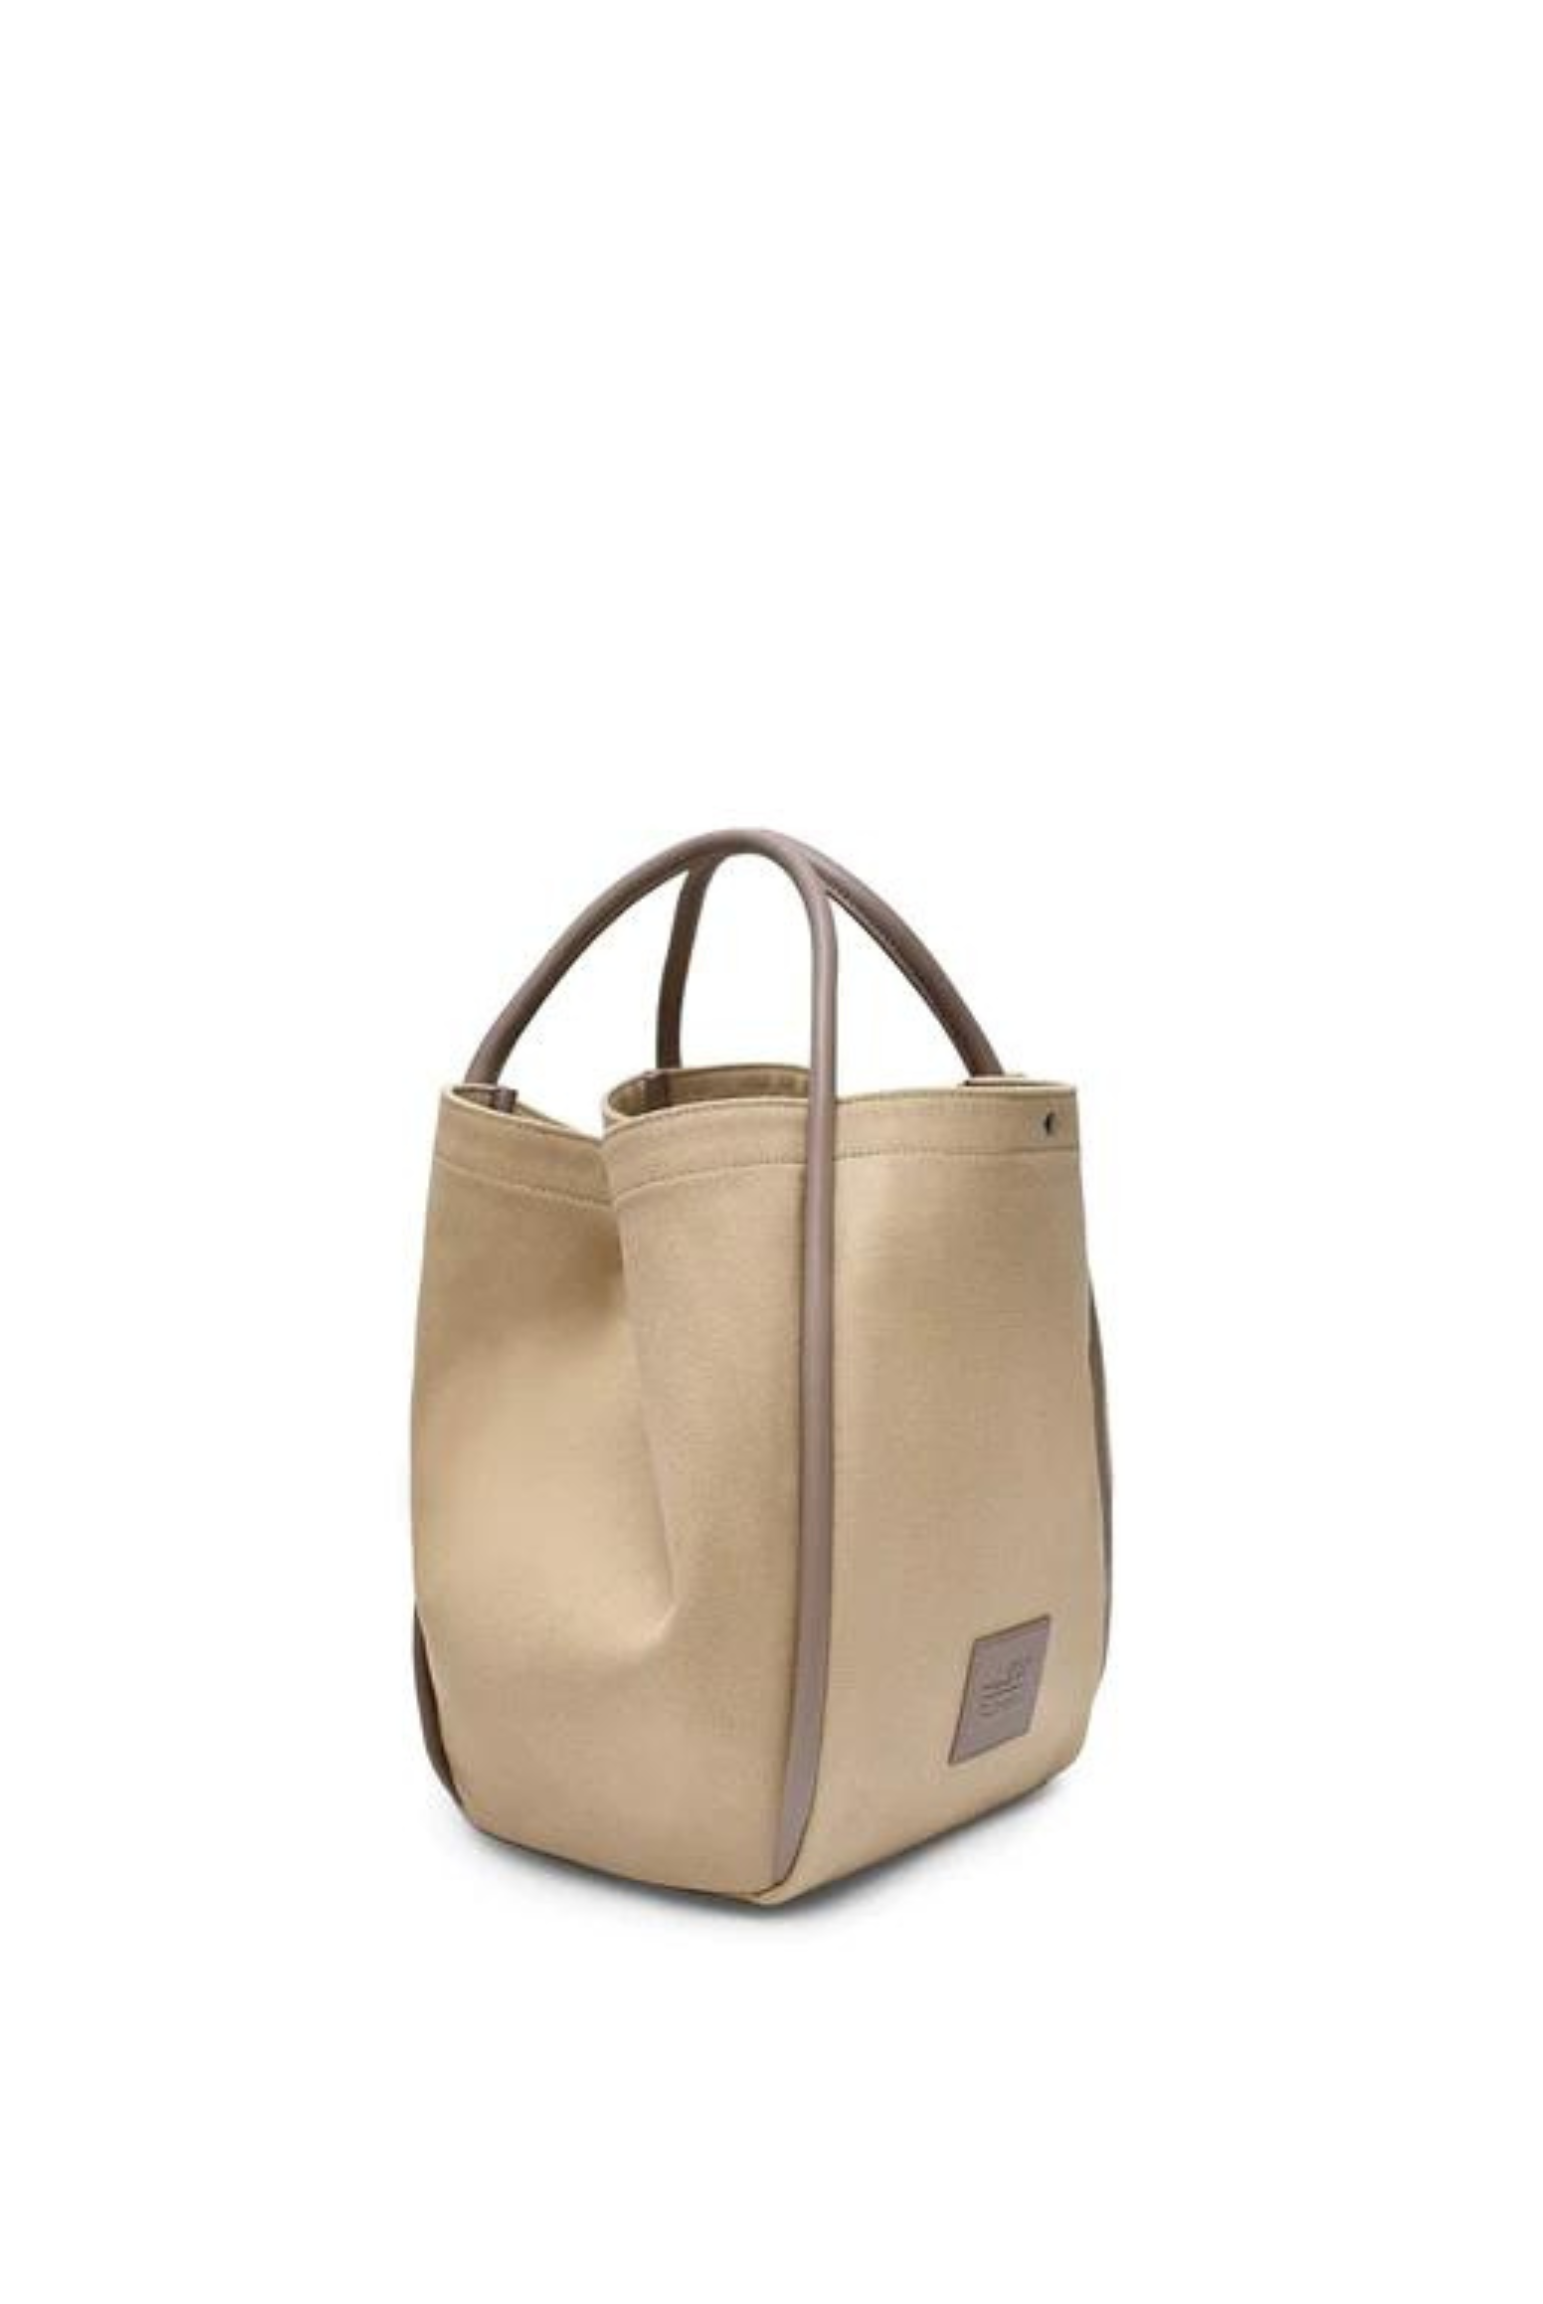 Fifth Avenue Tote - Elysian Couture